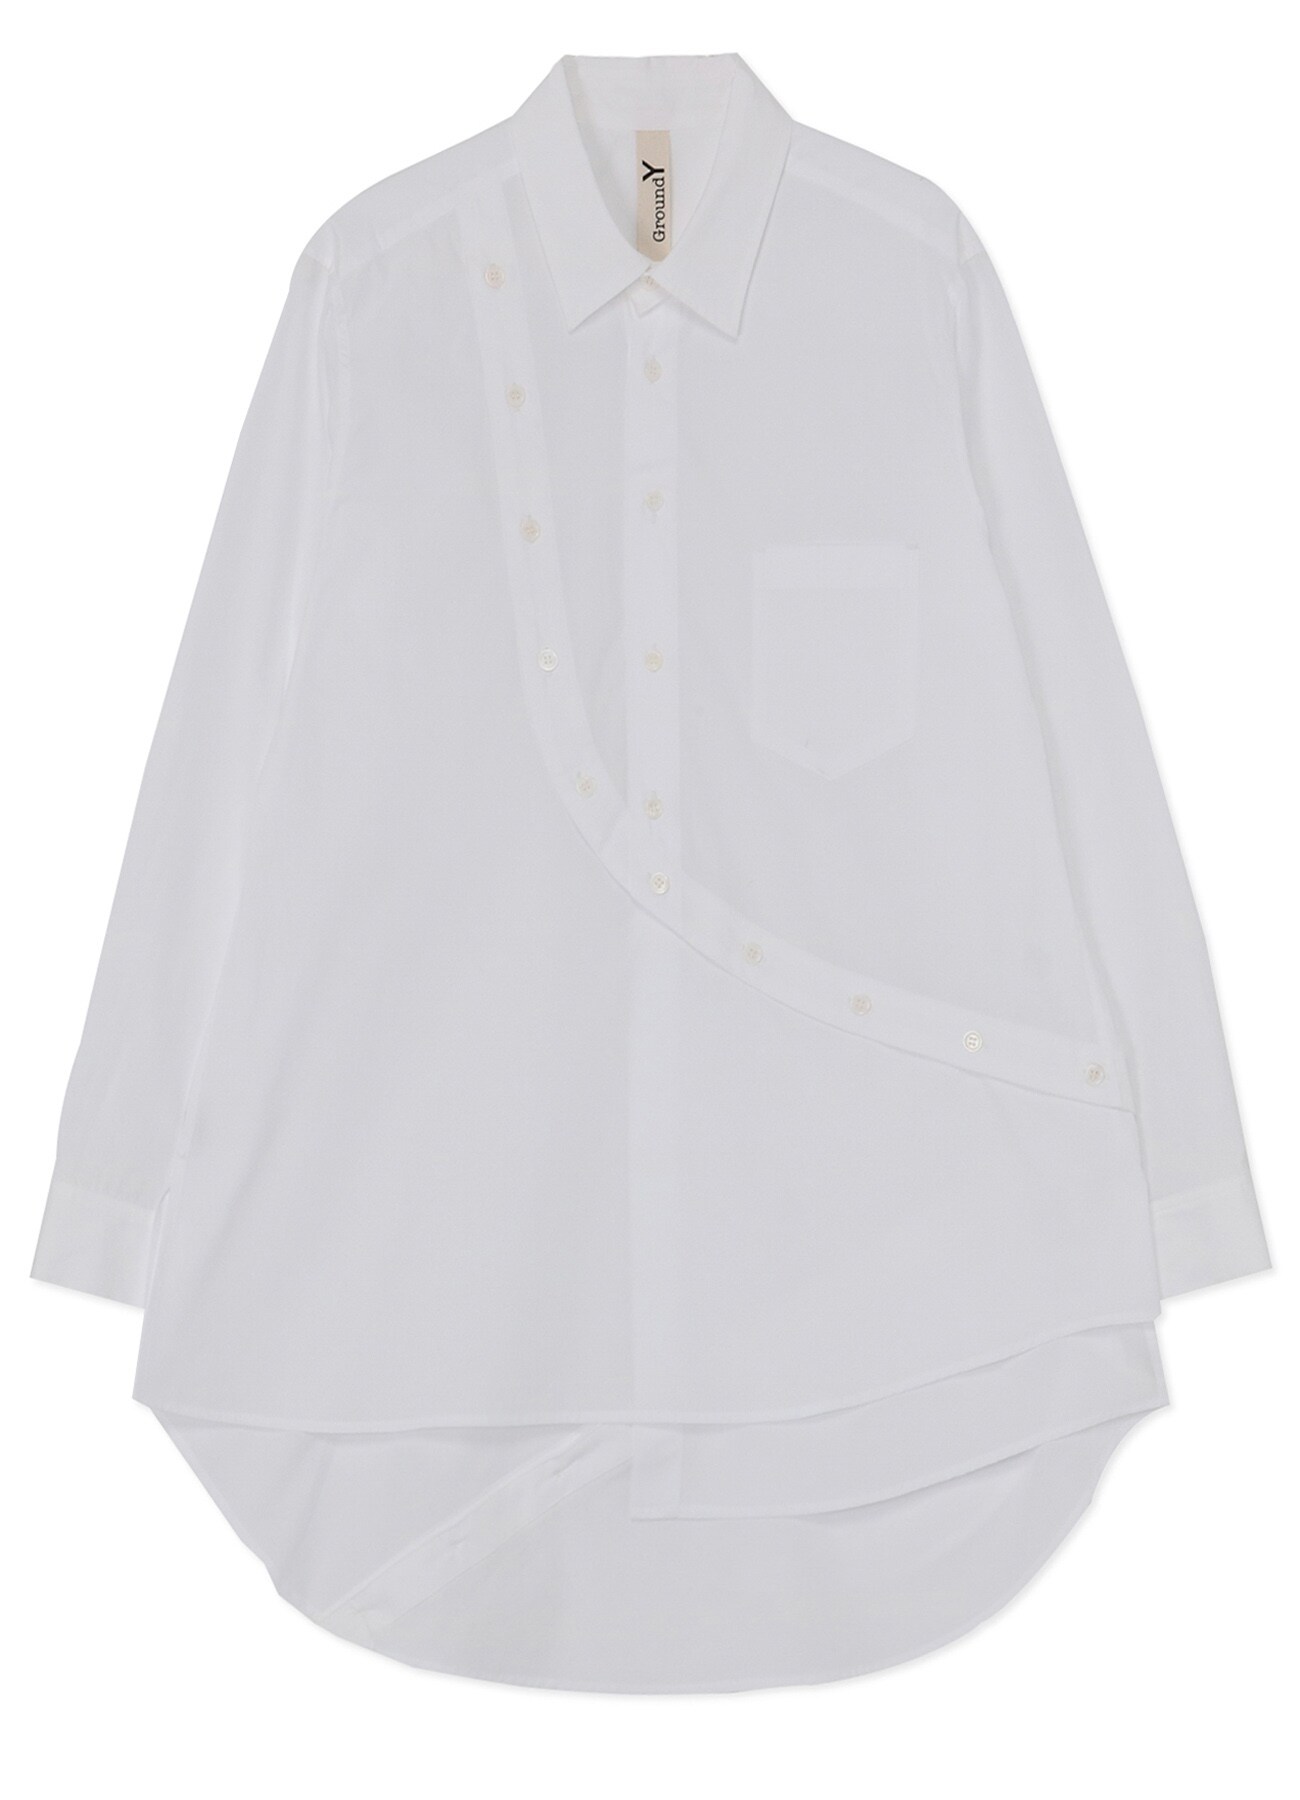 100/2 Cotton Broadcloth Shirt with Curved Placket